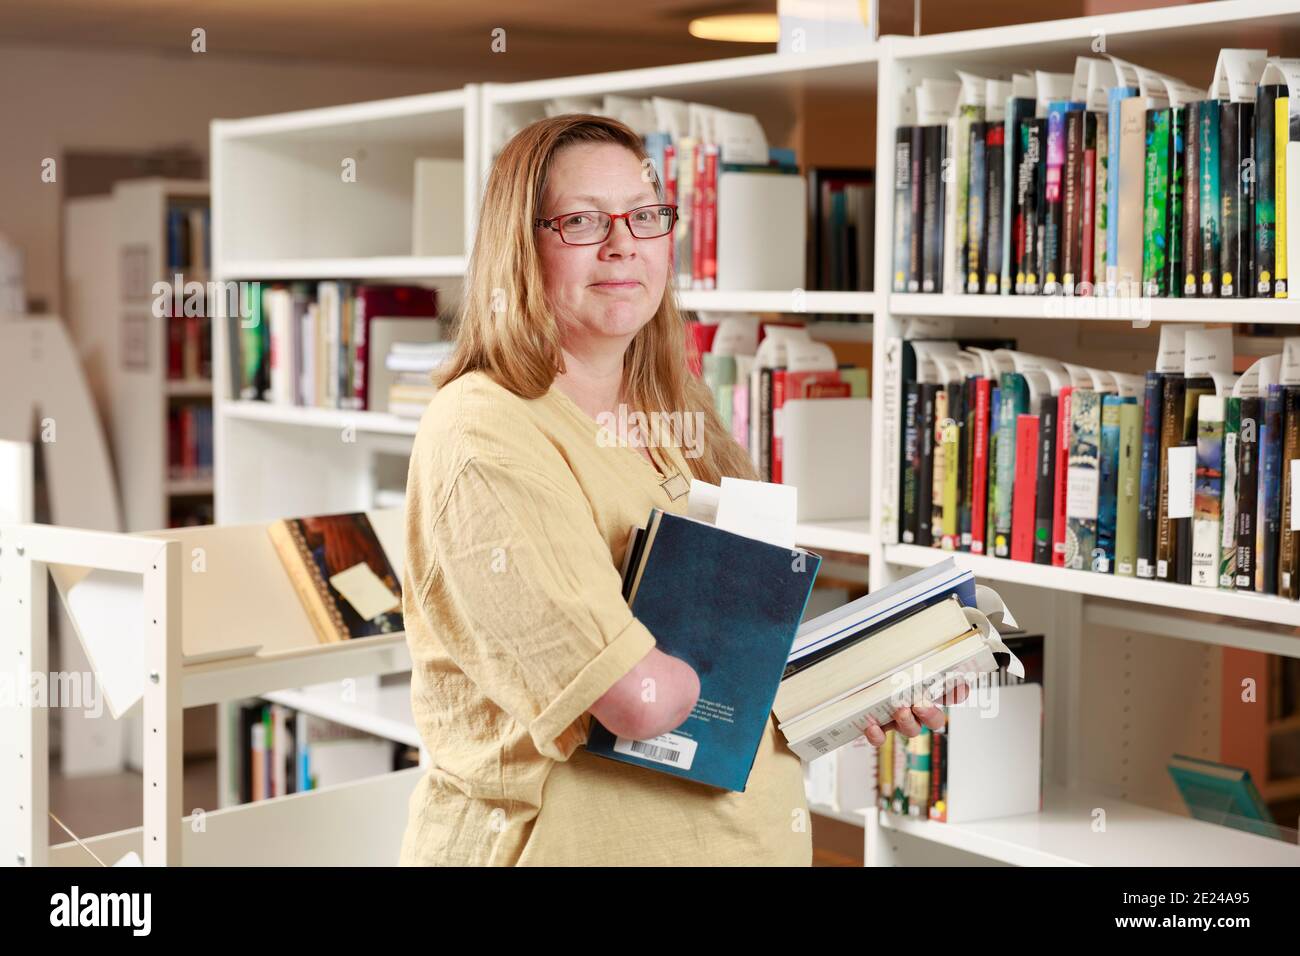 Librarian placing books on shelf Stock Photo